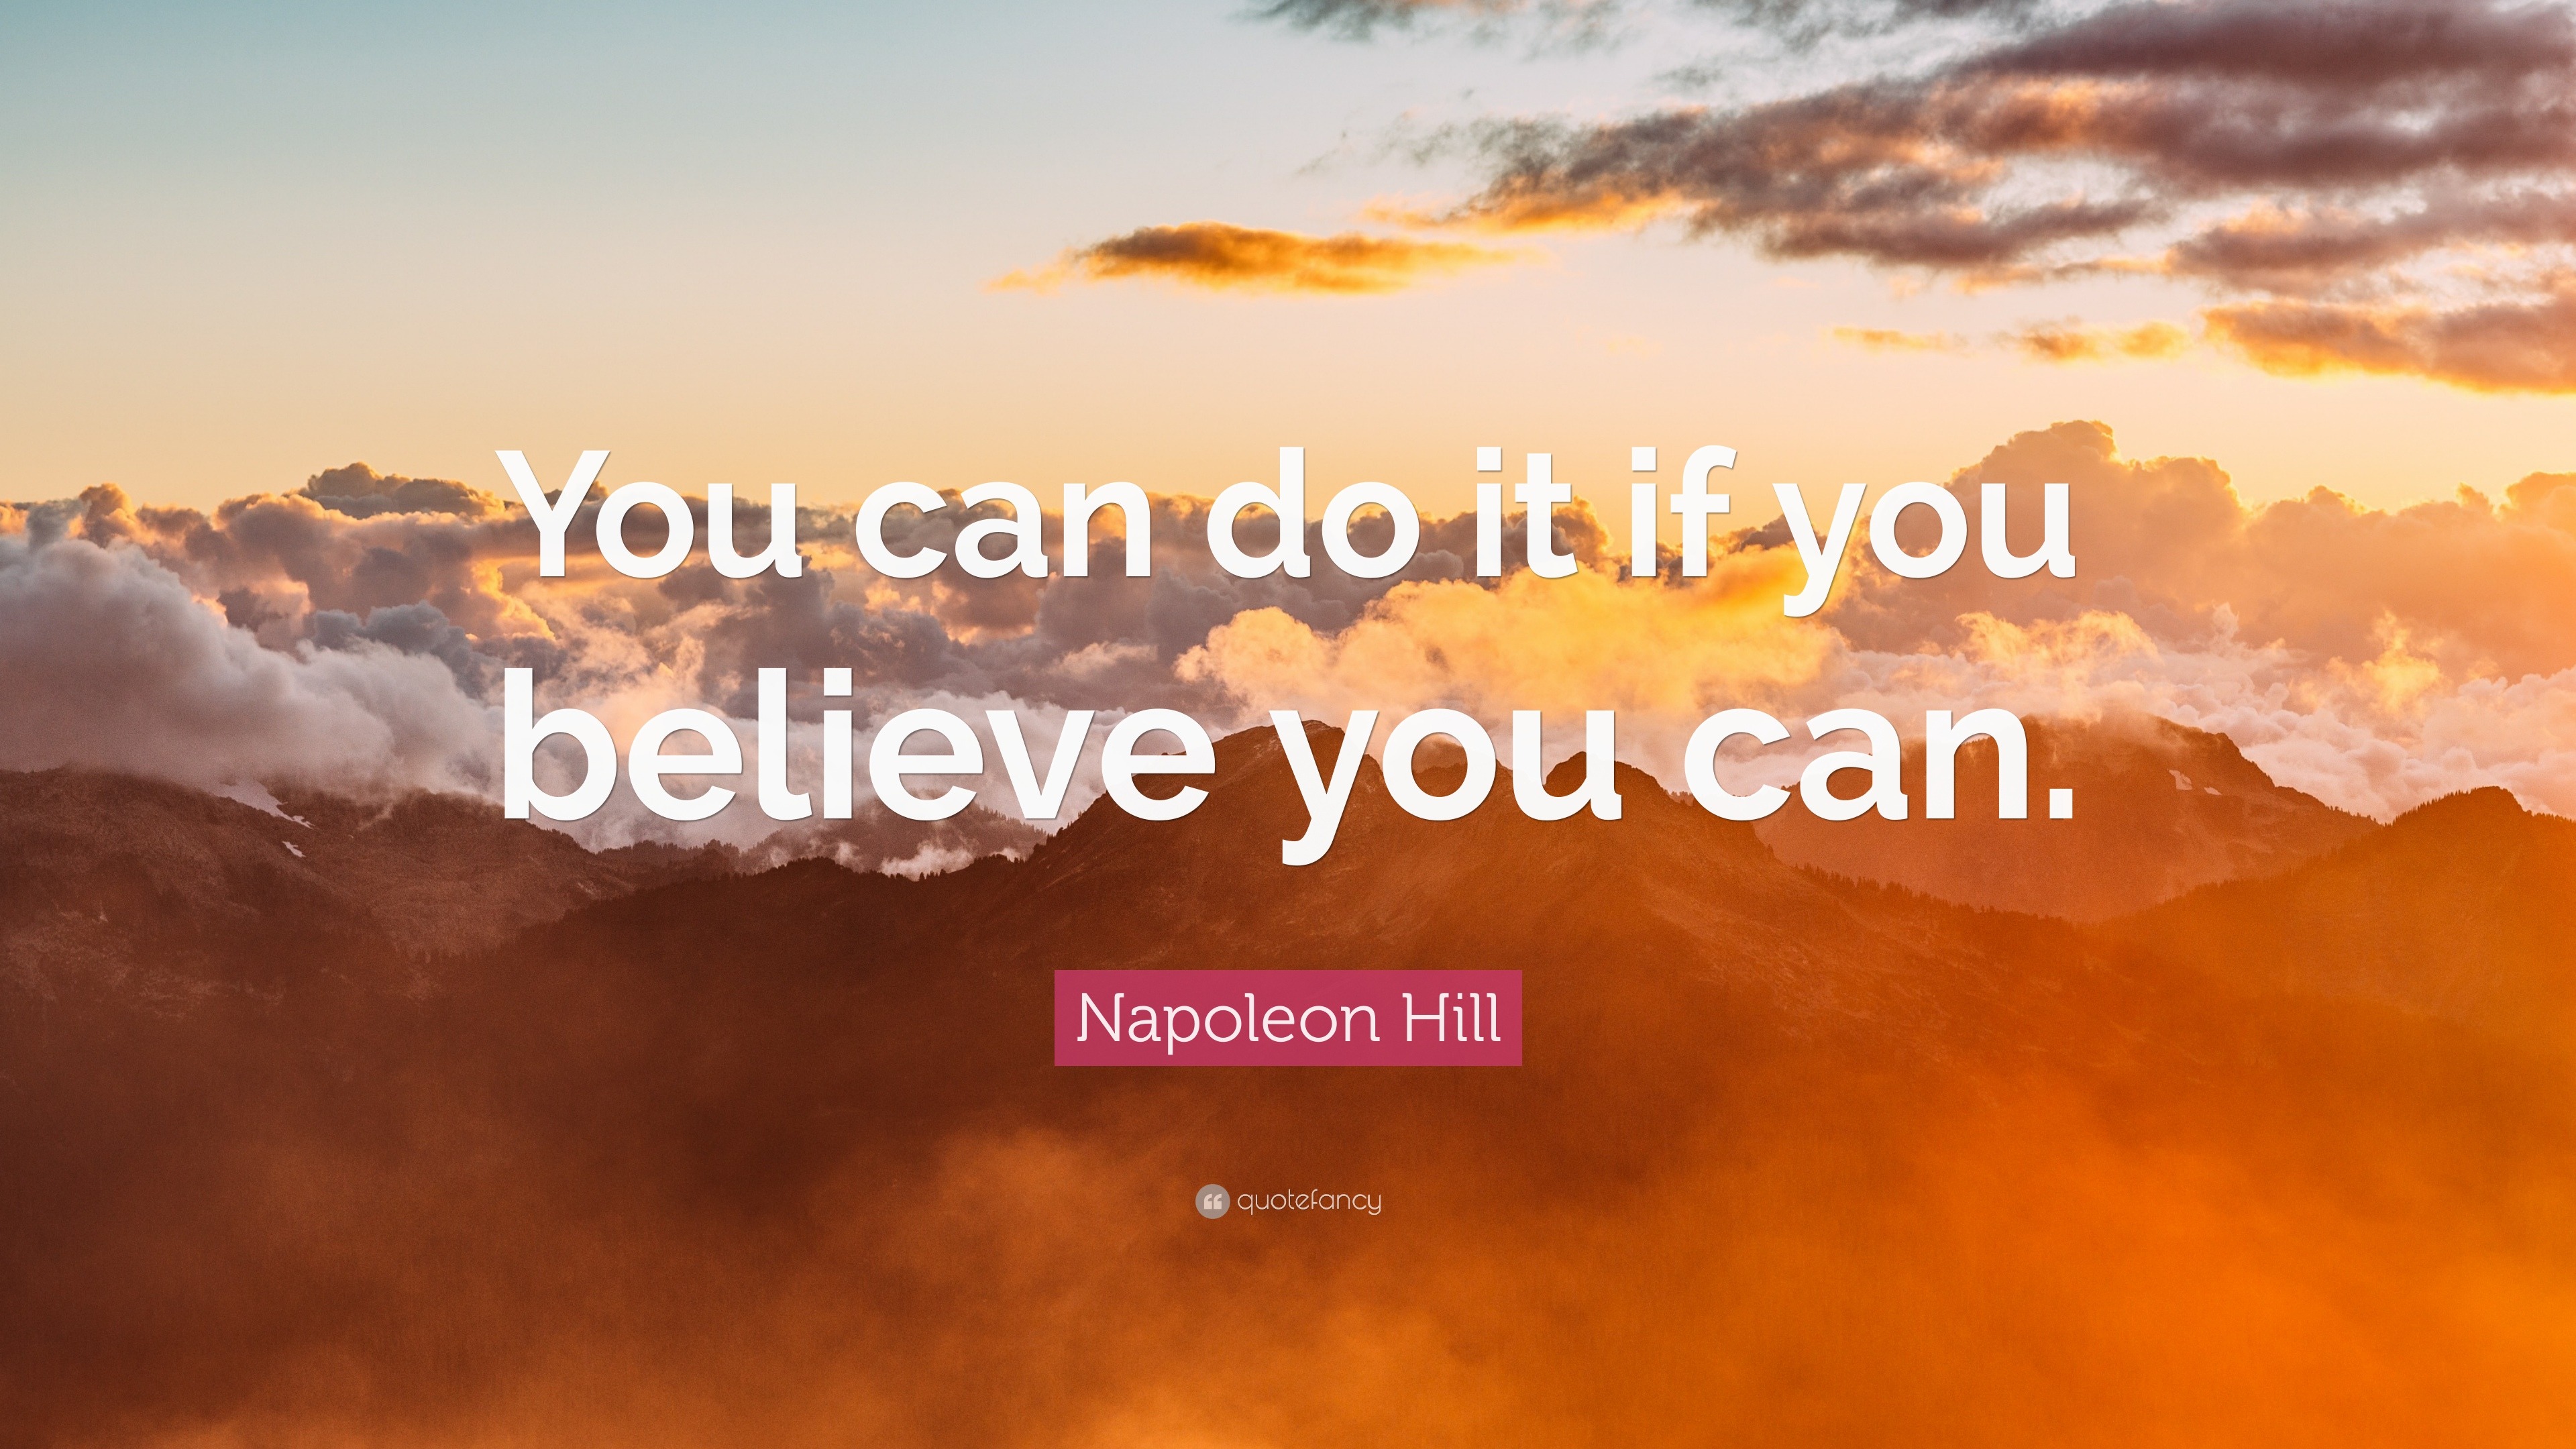 Napoleon Hill Quote “You can do it if you believe you can